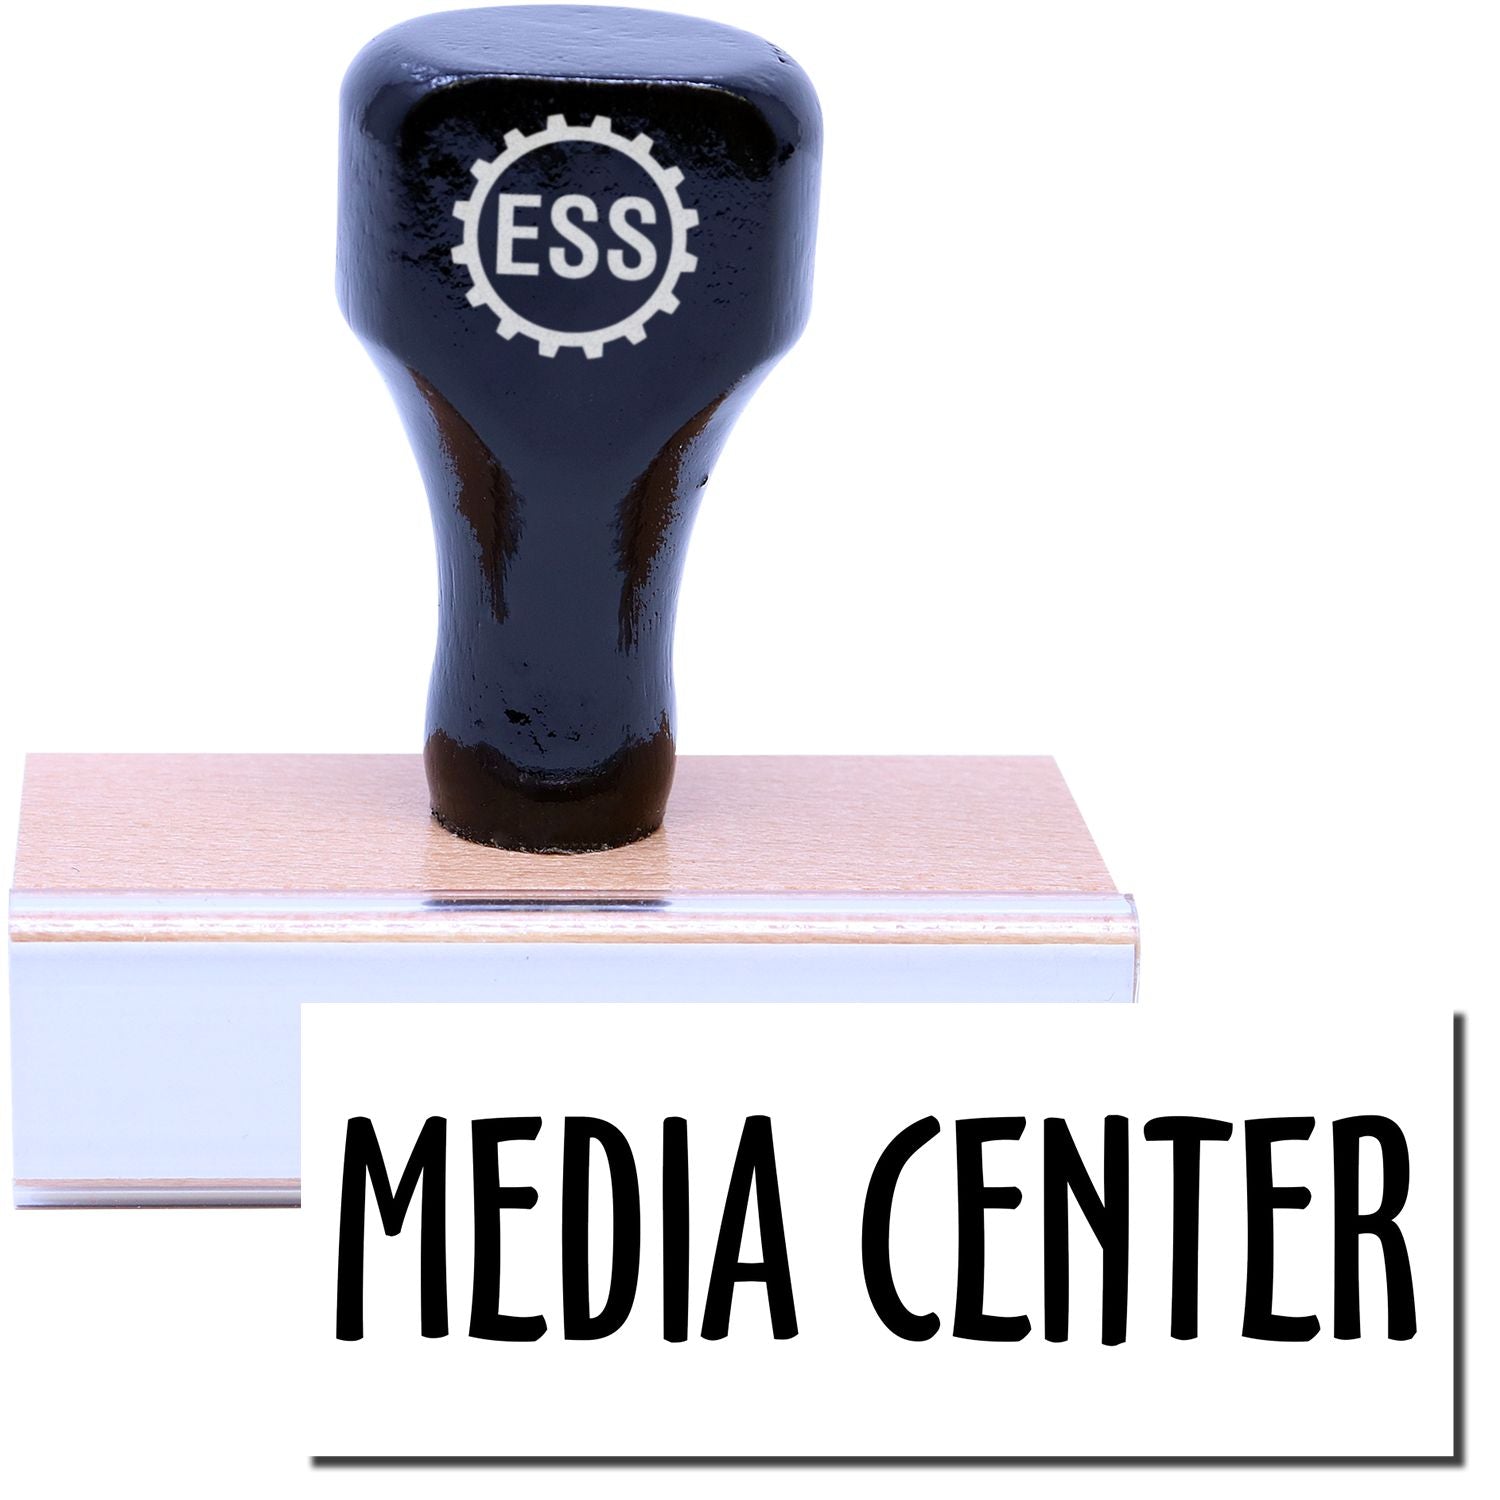 A stock office rubber stamp with a stamped image showing how the text "MEDIA CENTER" in a large font is displayed after stamping.